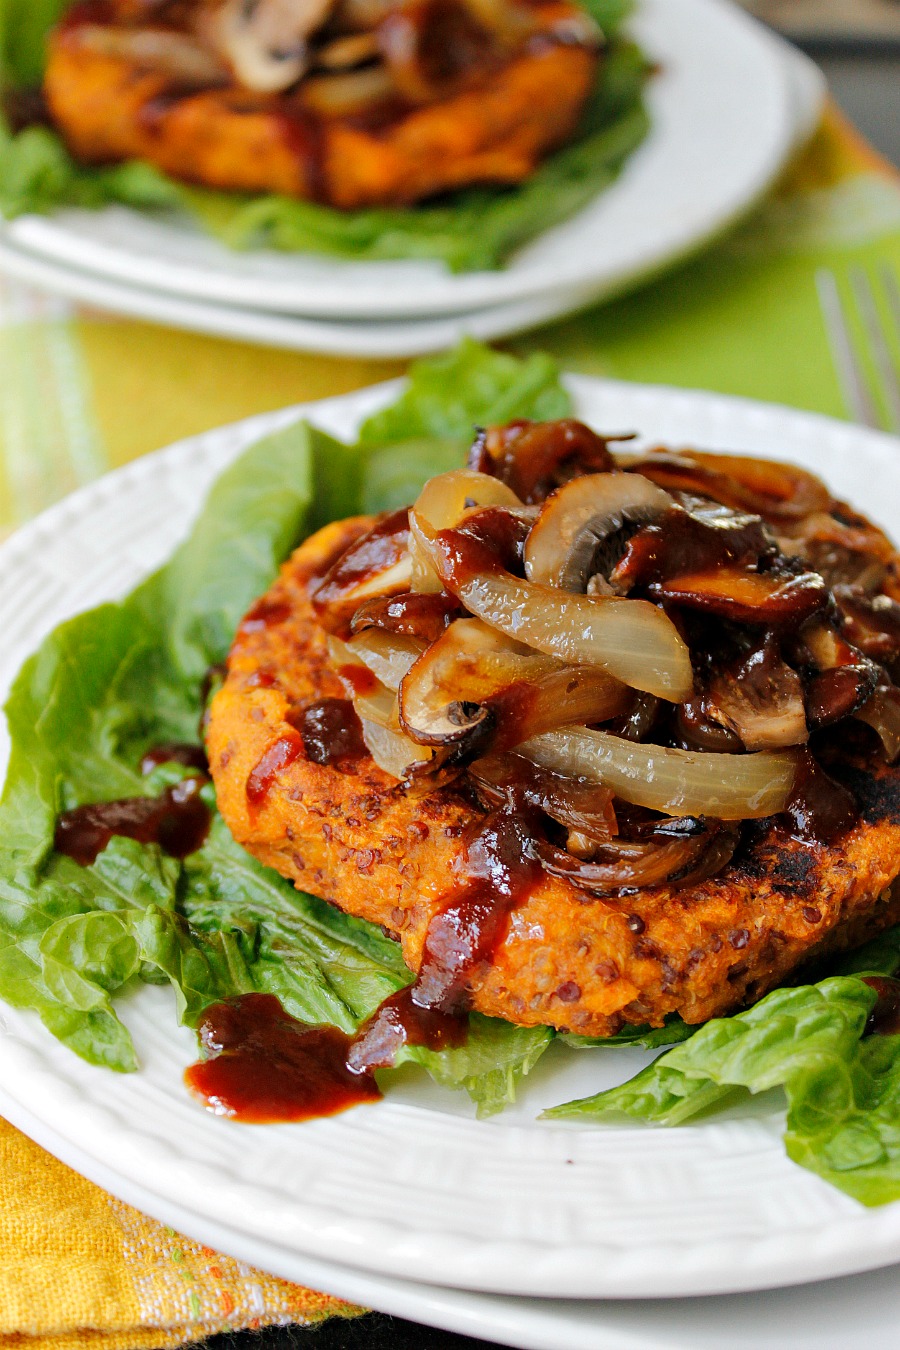 Quinoa Sweet Potato Patties with Caramelized Onions and Mushrooms